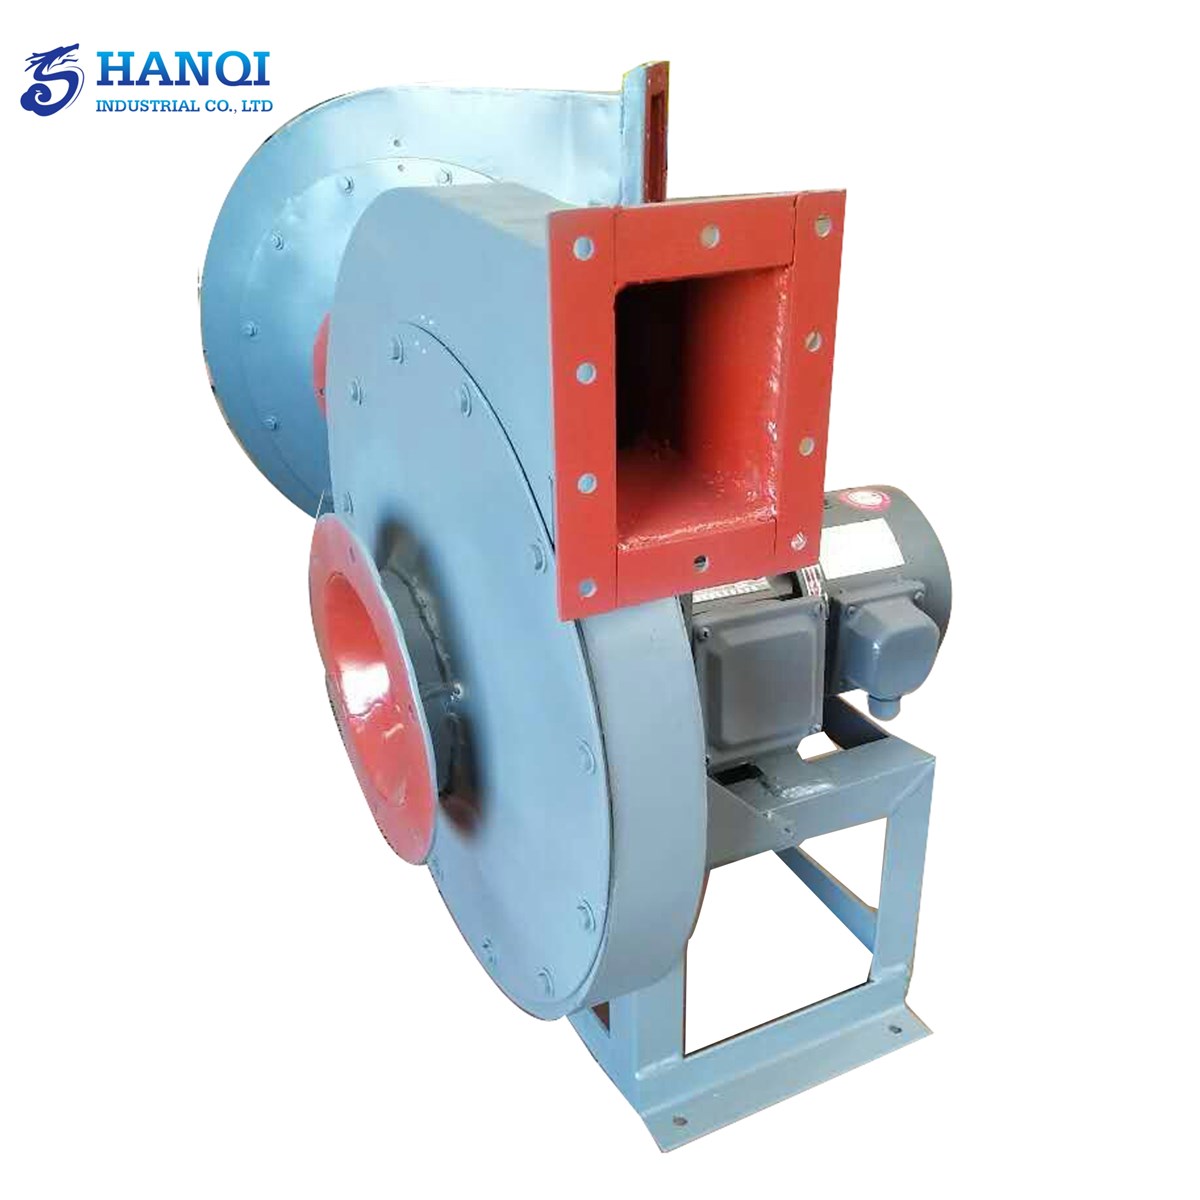 Industrial High Pressure Centrifugal Fan Blower for Ventilator & Air Cooling of Forge/Furnace Plant from OEM